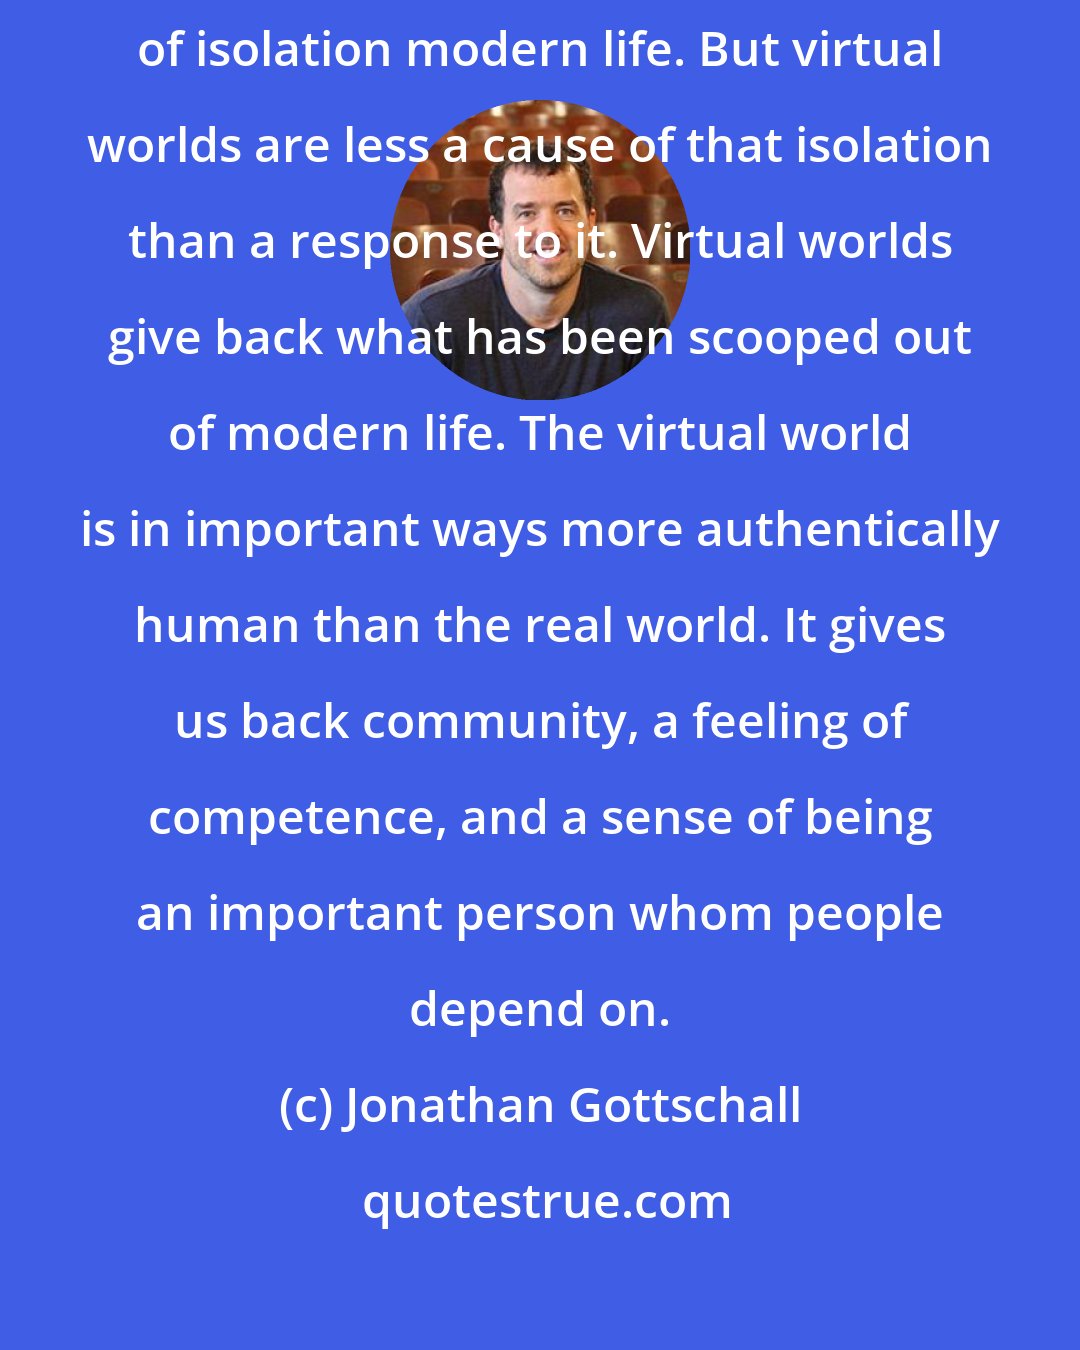 Jonathan Gottschall: Commentators frequently blame MMORPGs for an increasing sense of isolation modern life. But virtual worlds are less a cause of that isolation than a response to it. Virtual worlds give back what has been scooped out of modern life. The virtual world is in important ways more authentically human than the real world. It gives us back community, a feeling of competence, and a sense of being an important person whom people depend on.